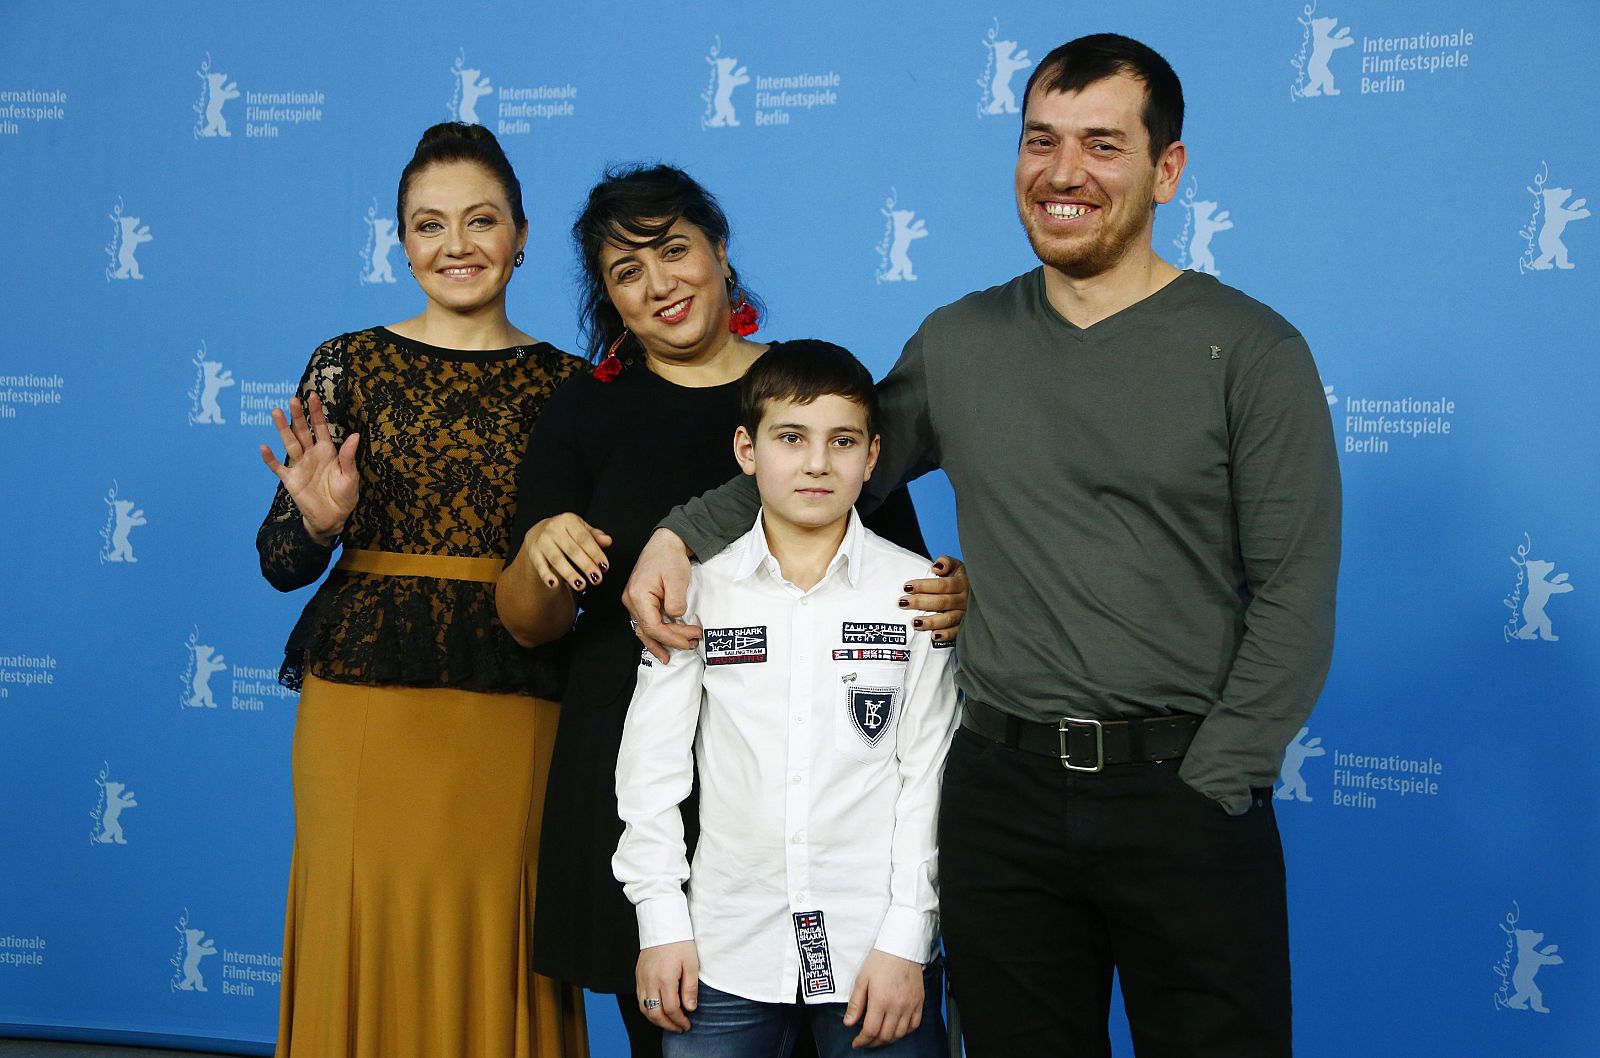 Director Mortezai poses with her cast during a photocall to promote the movie "Macondo" at the 64th Berlinale International Film Festival in Berlin